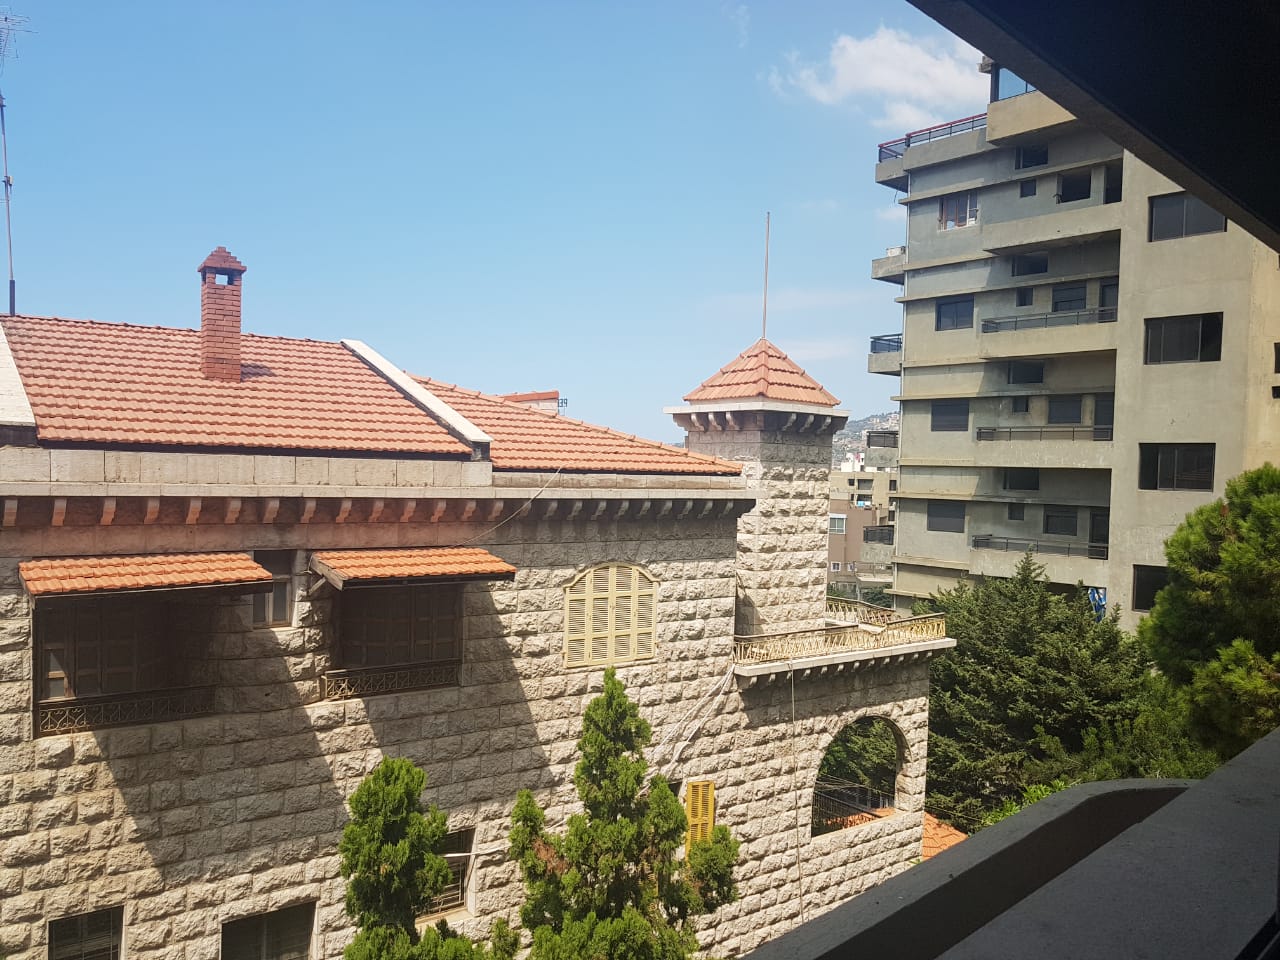 Apartment for sale in Haret Sakher, Jounieh, Lebanon, real estate in Haret Sakher Jounieh Lebanon, buy sell properties in Harte sakher jounieh Lebanon